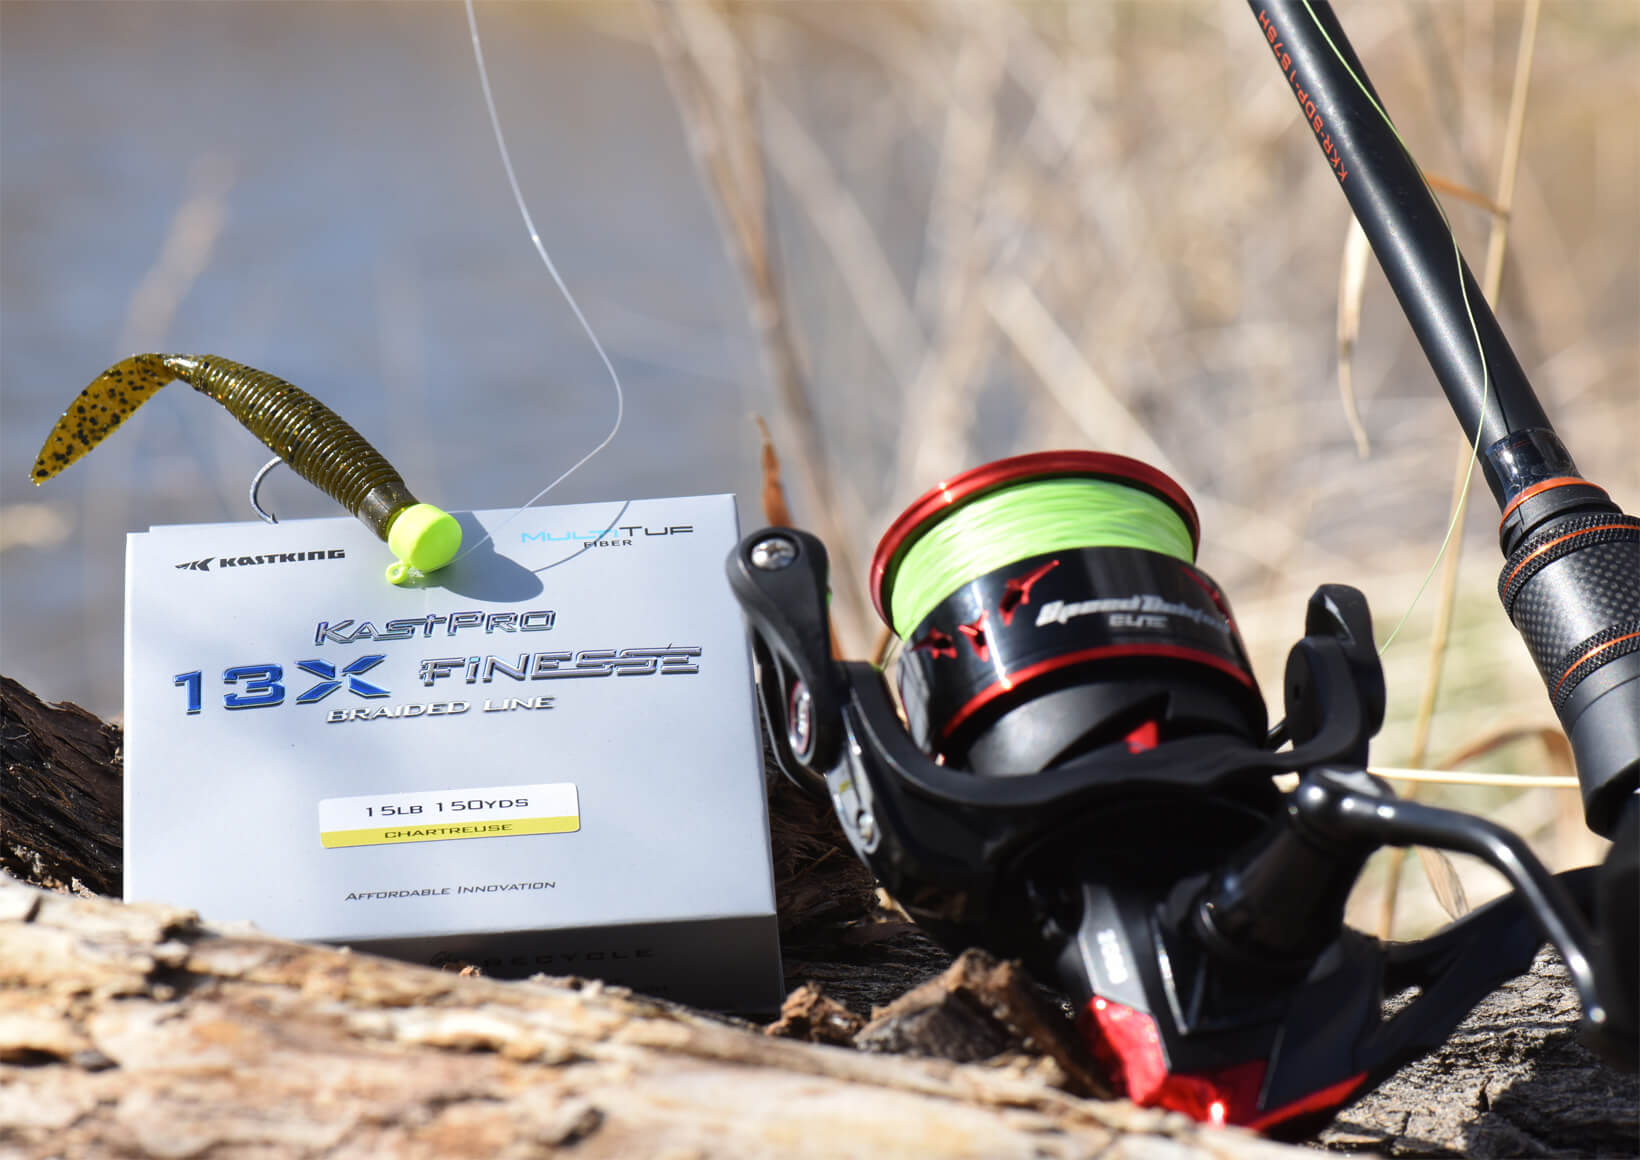 What pound test leader? - Fishing Rods, Reels, Line, and Knots